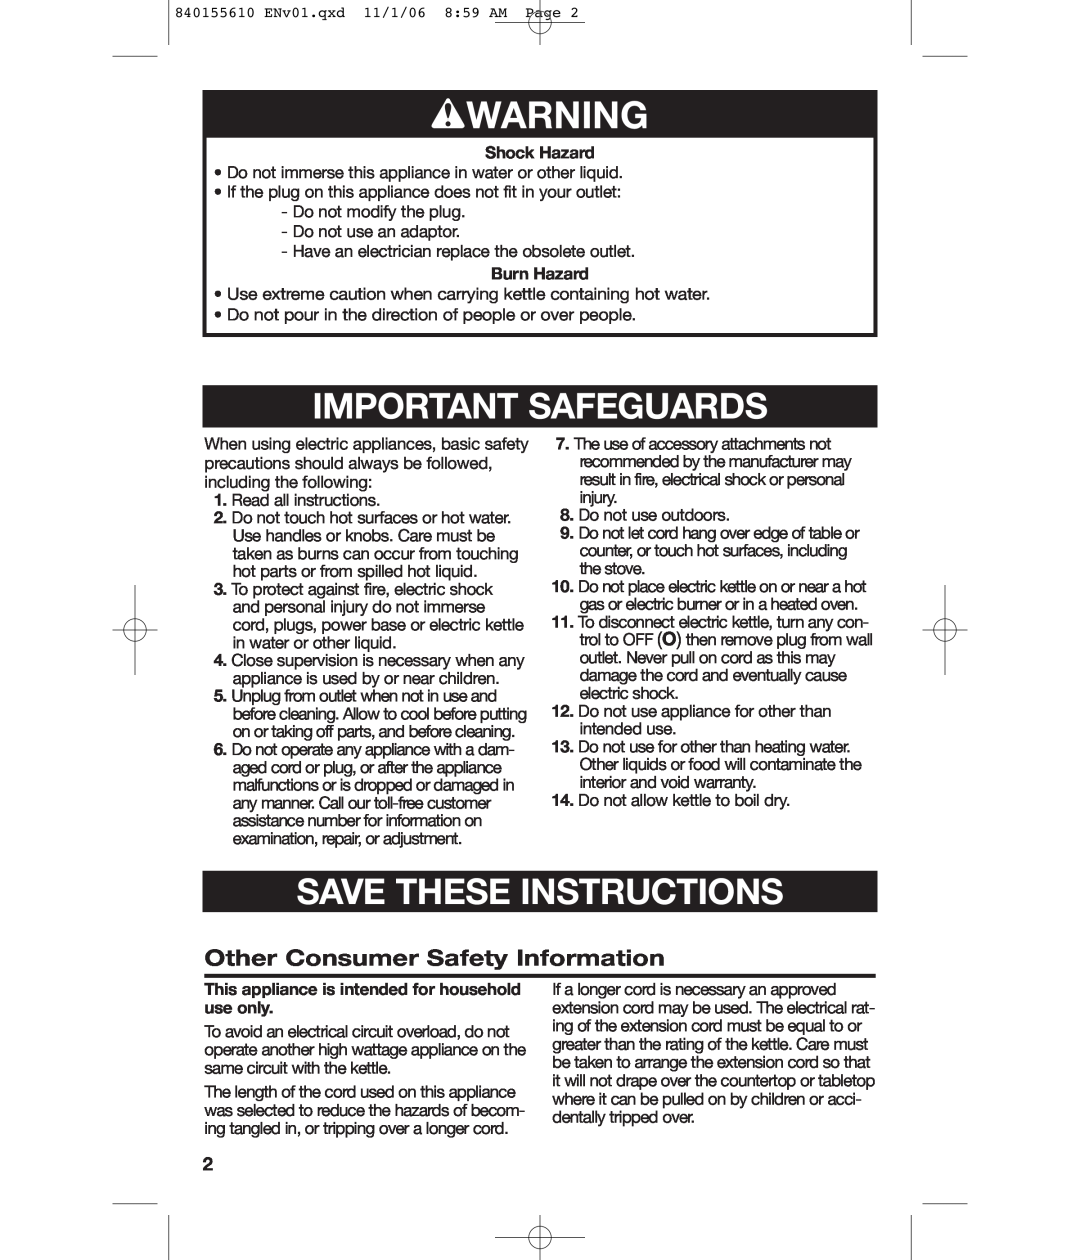 Hamilton Beach 840155610 manual wWARNING, Important Safeguards, Save These Instructions, Other Consumer Safety Information 